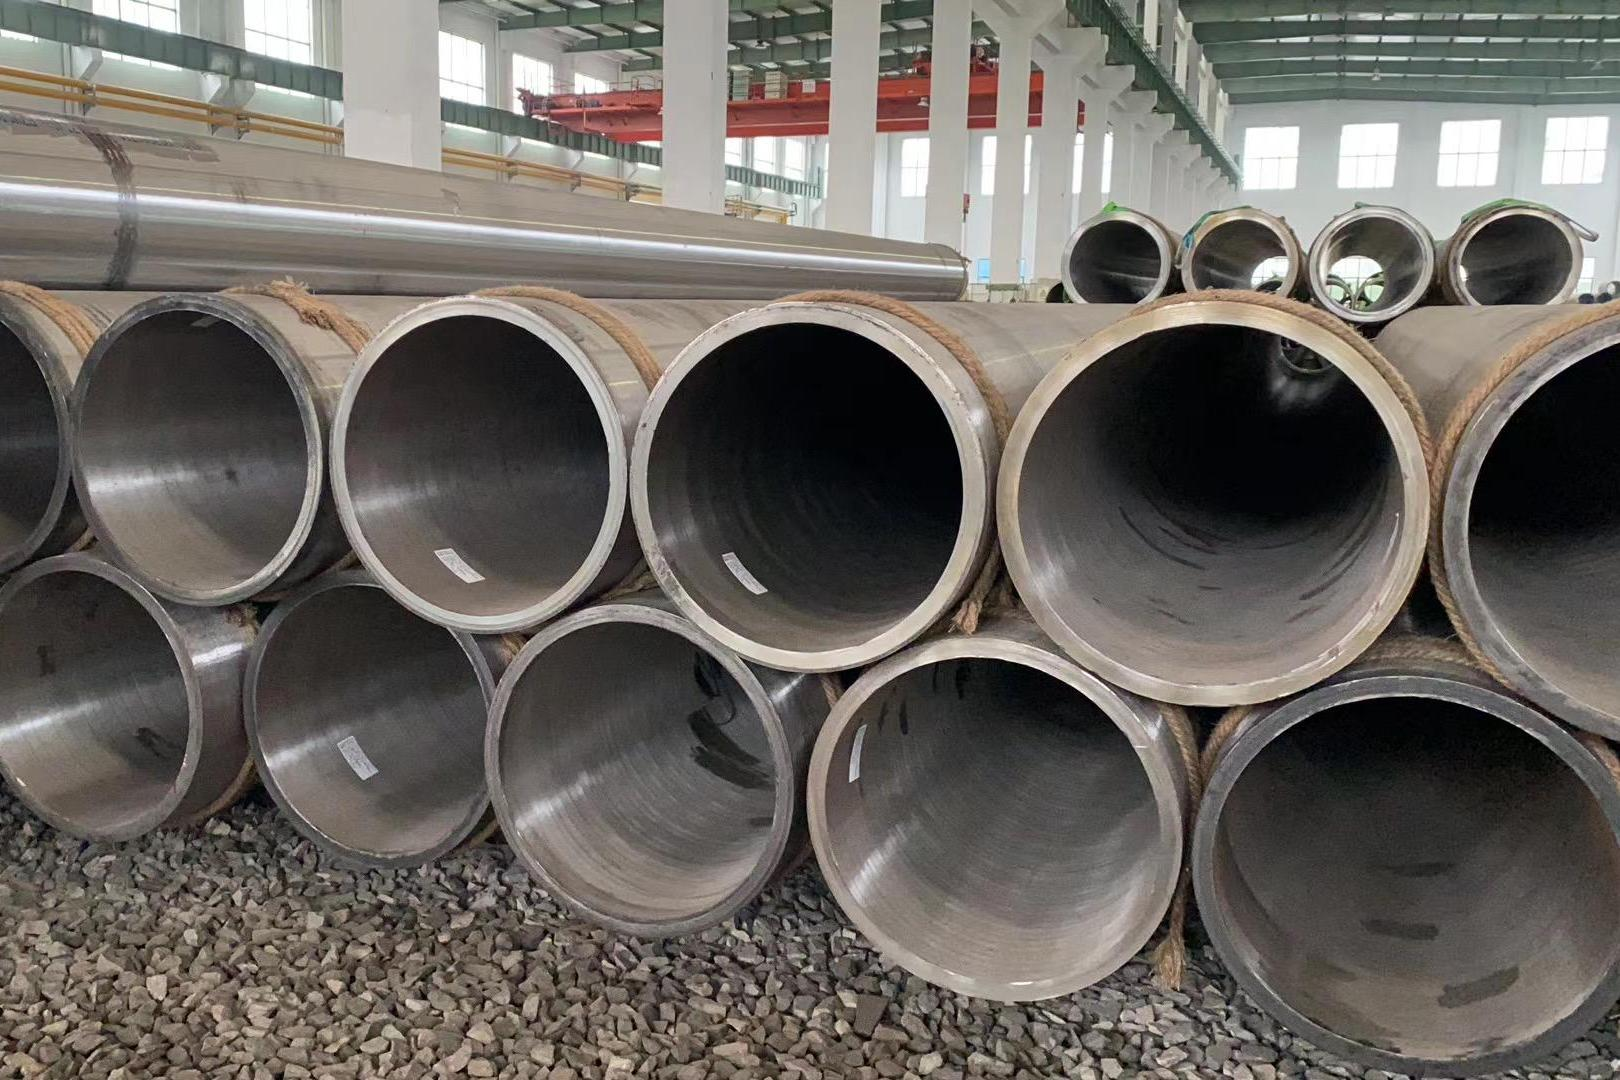 Tianjin Sanon Steel Pipe Co., Ltd. will only produce main products this year.